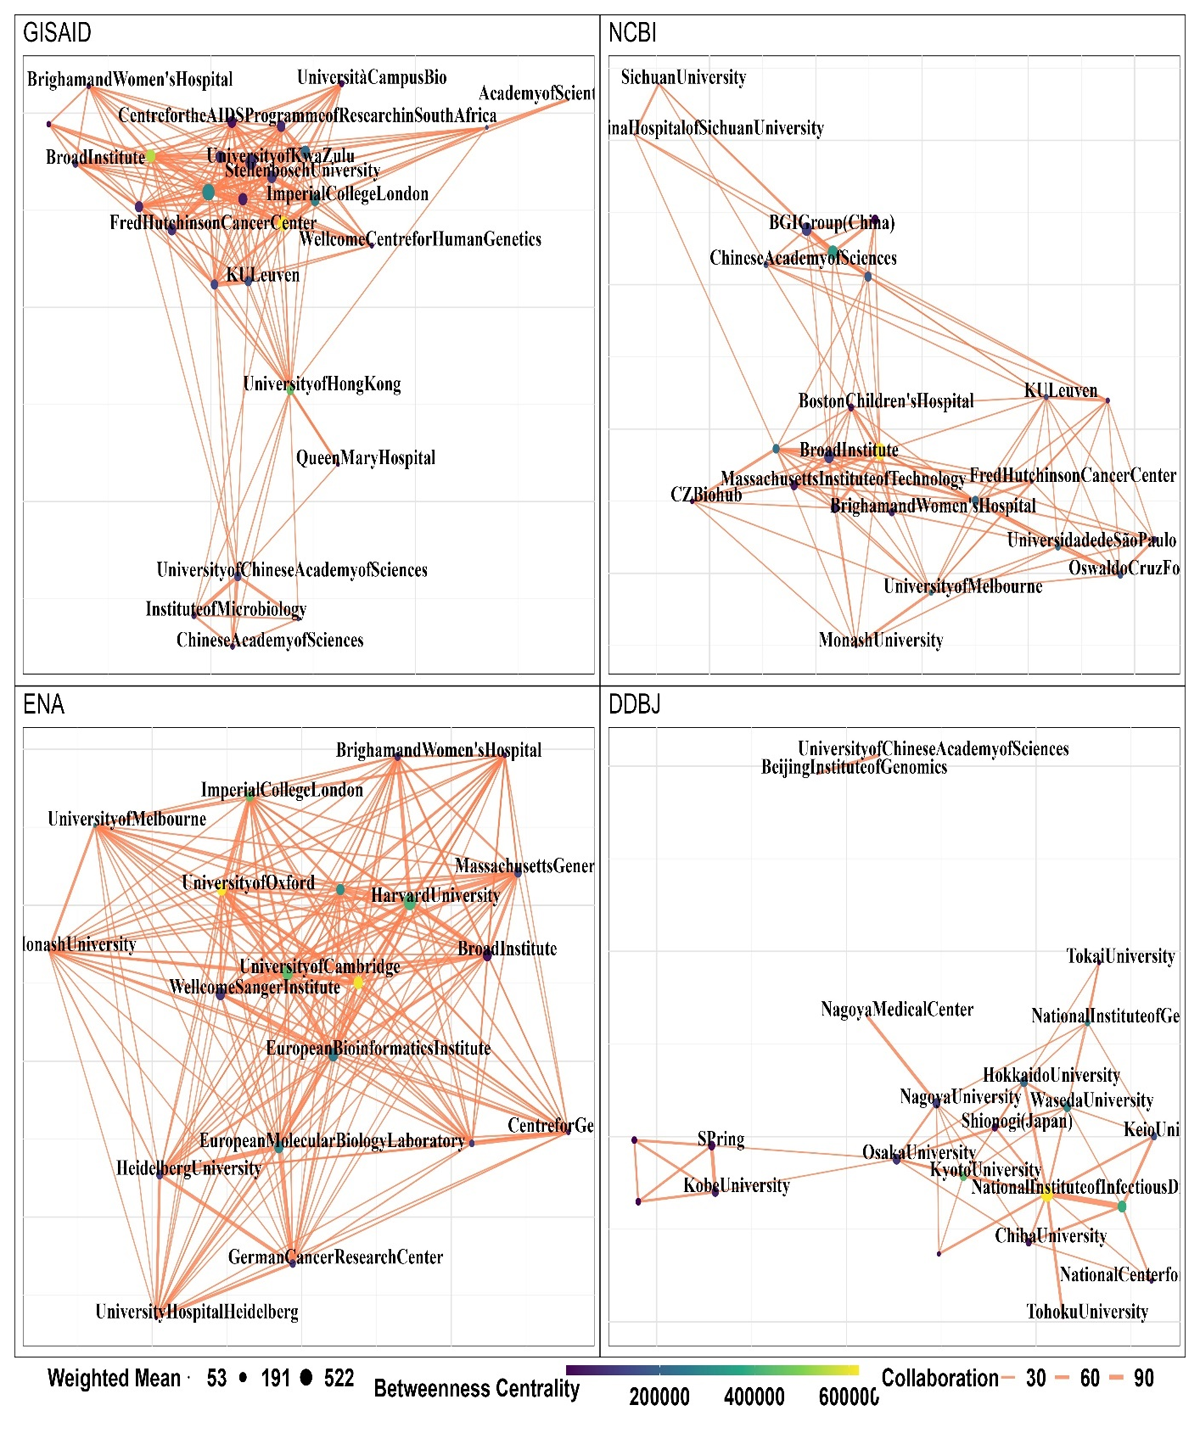 Institution group network across major SARS-CoV-2 repositories